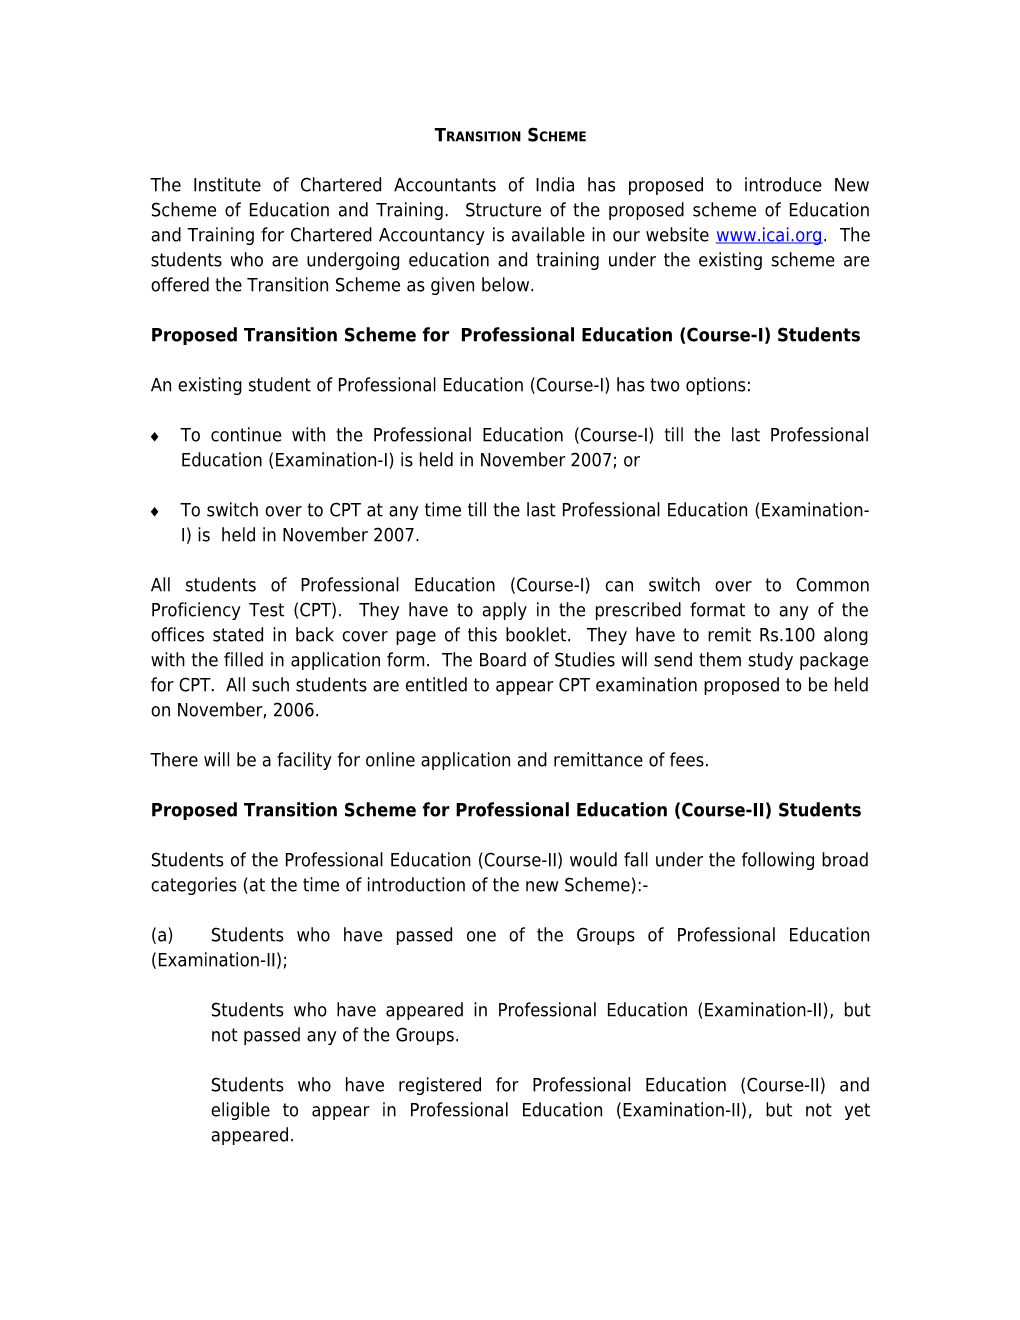 Proposed Transition Scheme for Professional Education (Course-I) Students